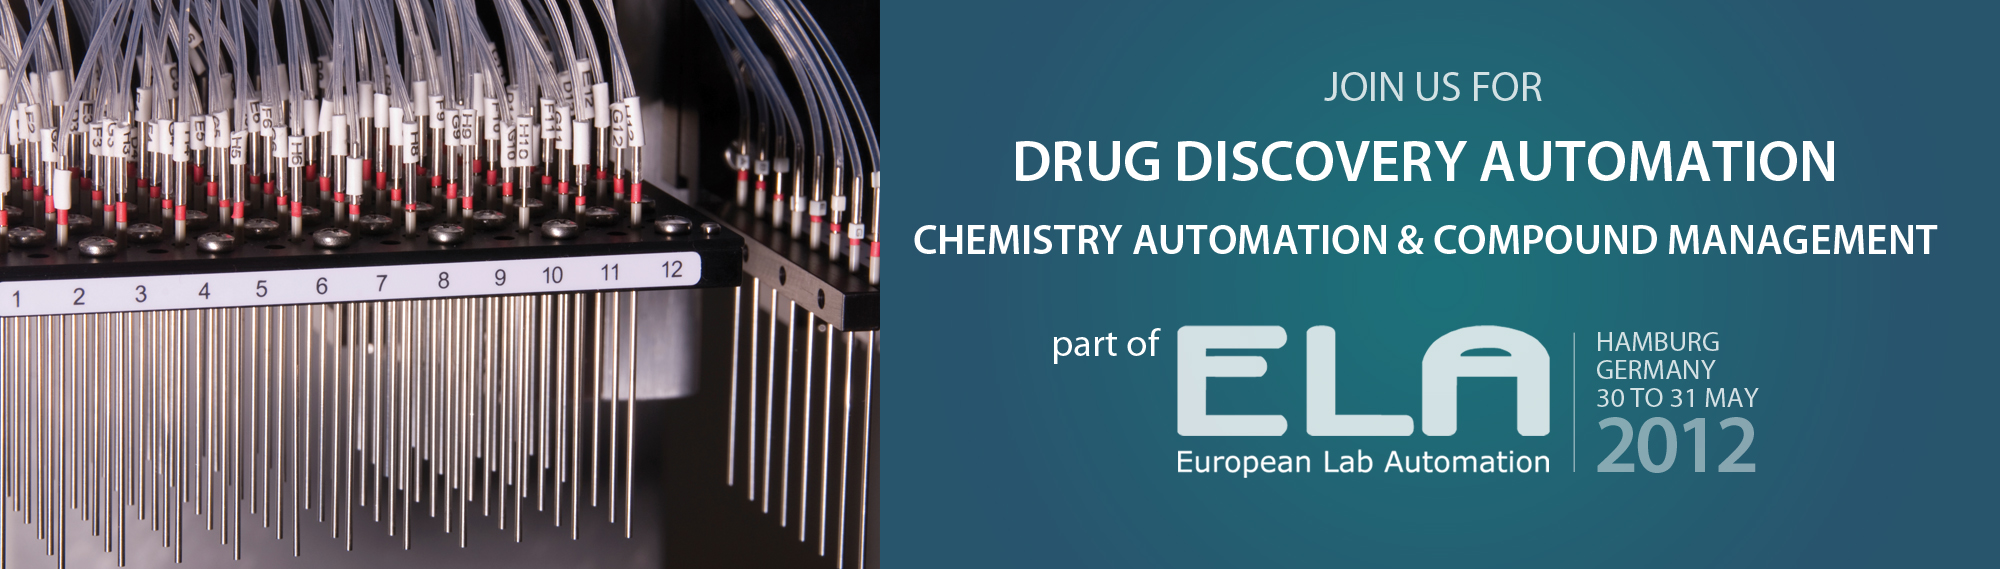 Drug Discovery Automation - Chemistry Automation & Compound Management